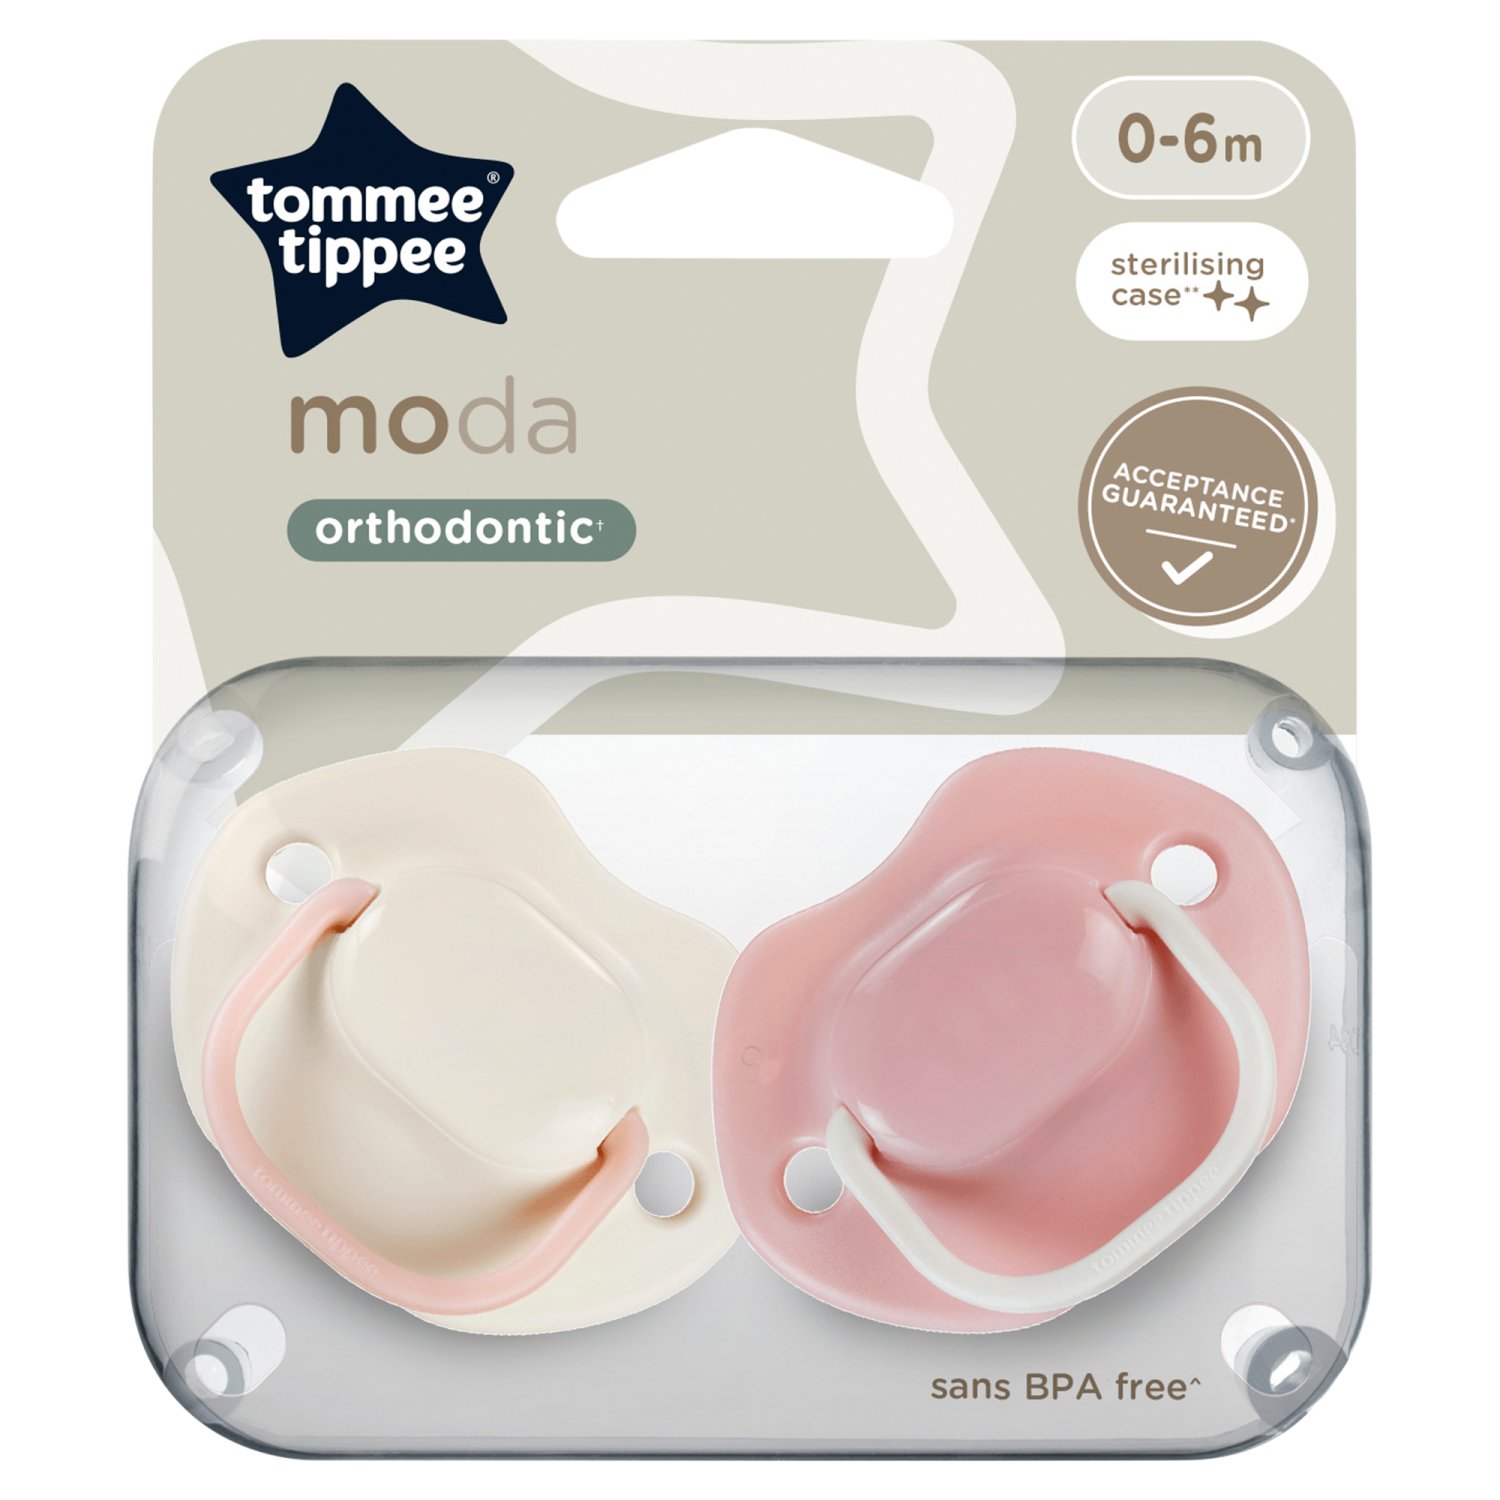 Tommee Tippee Orthodontic Soothers 0-6 Months (2 Piece)